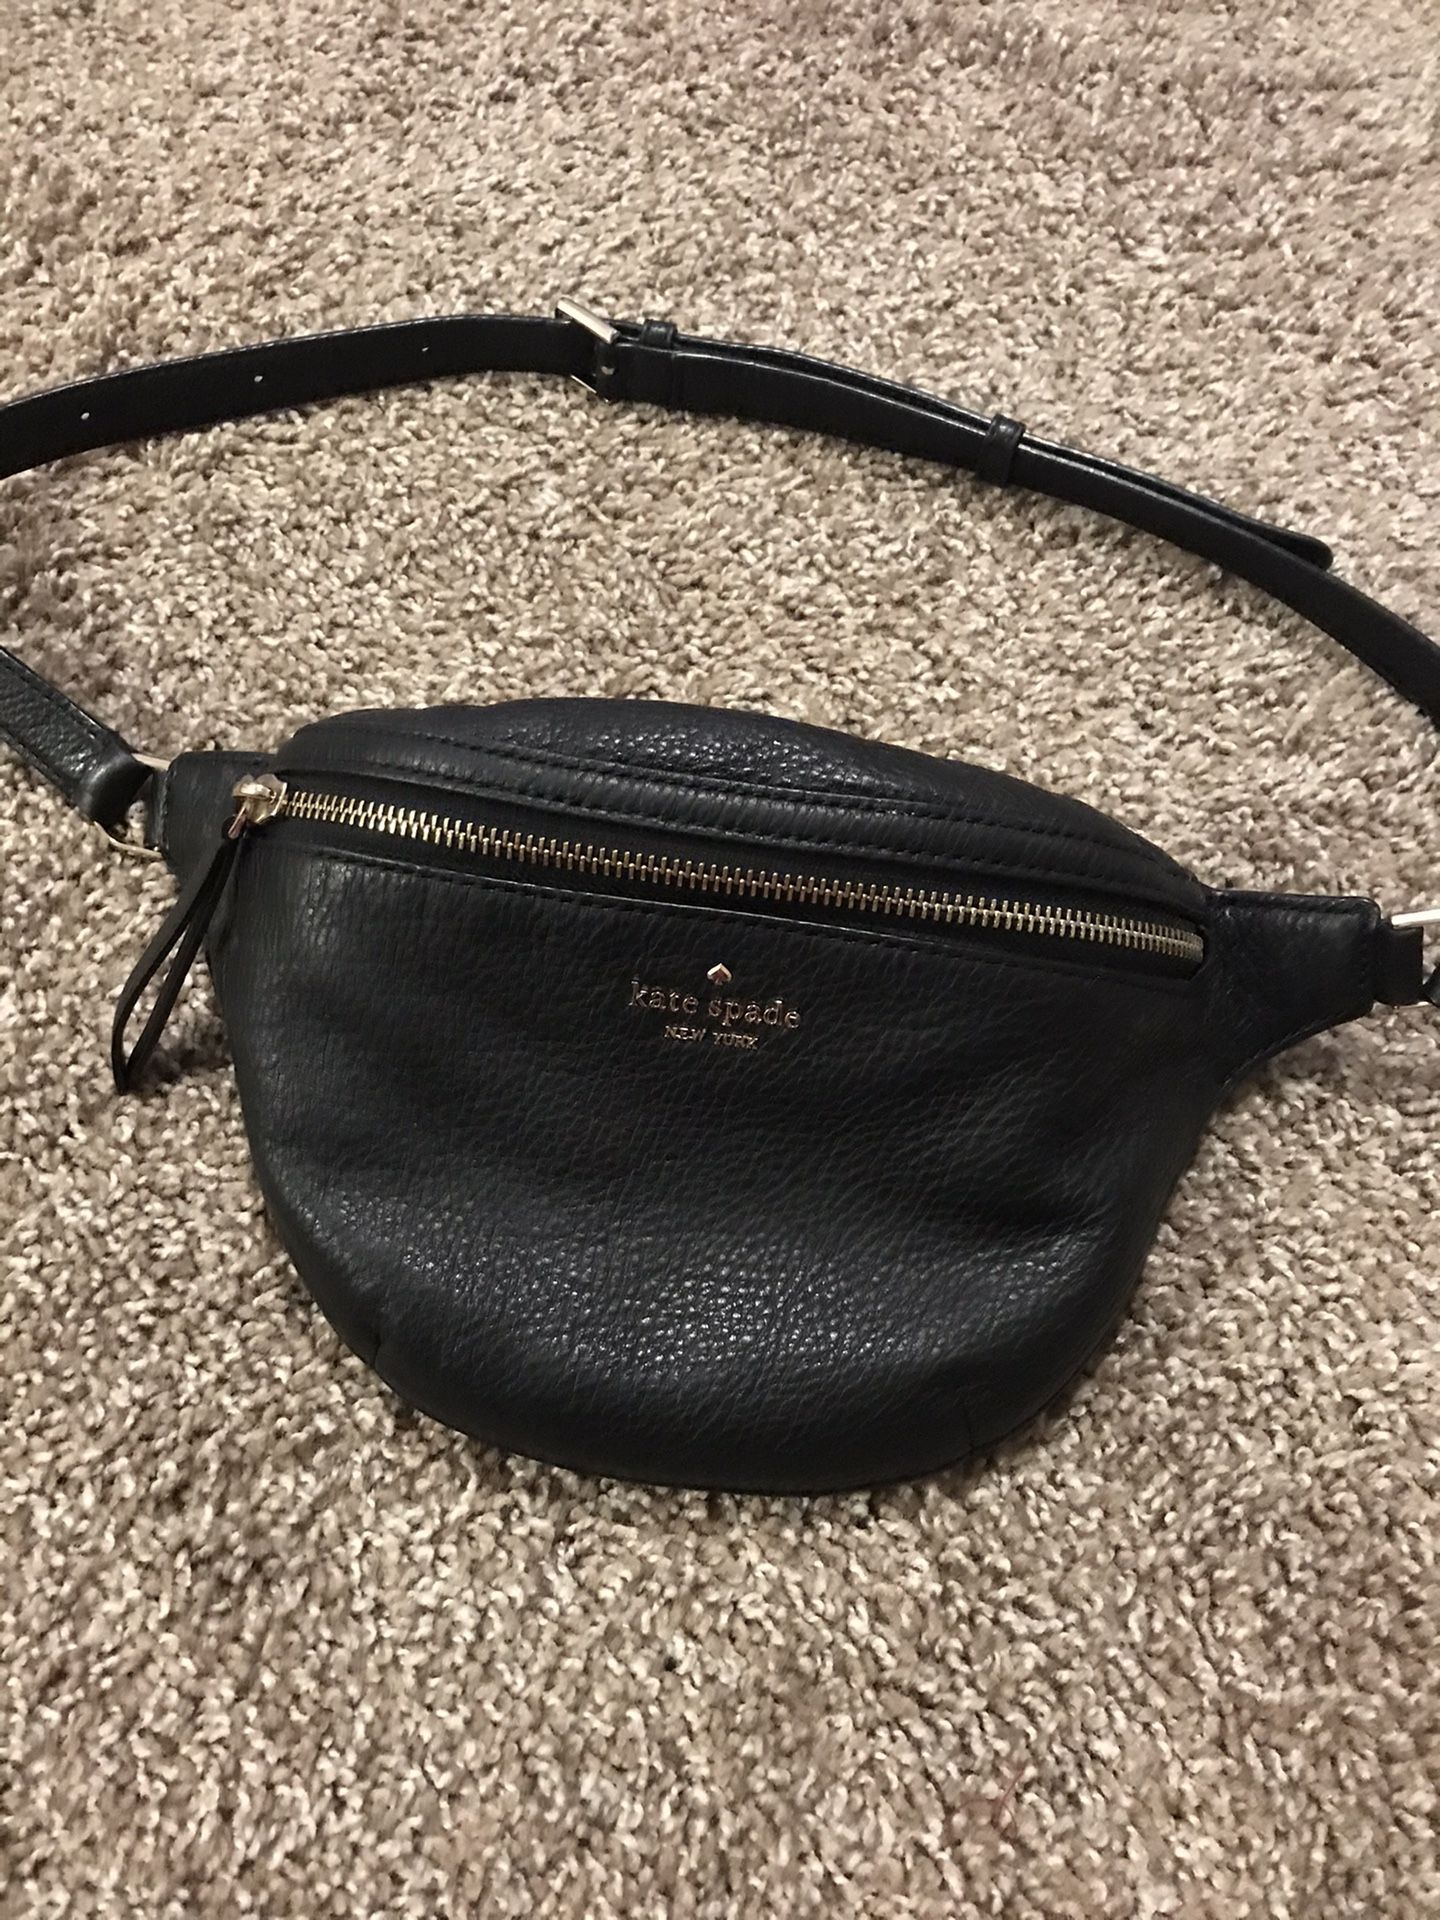 Kate spade Fanny pack 50$